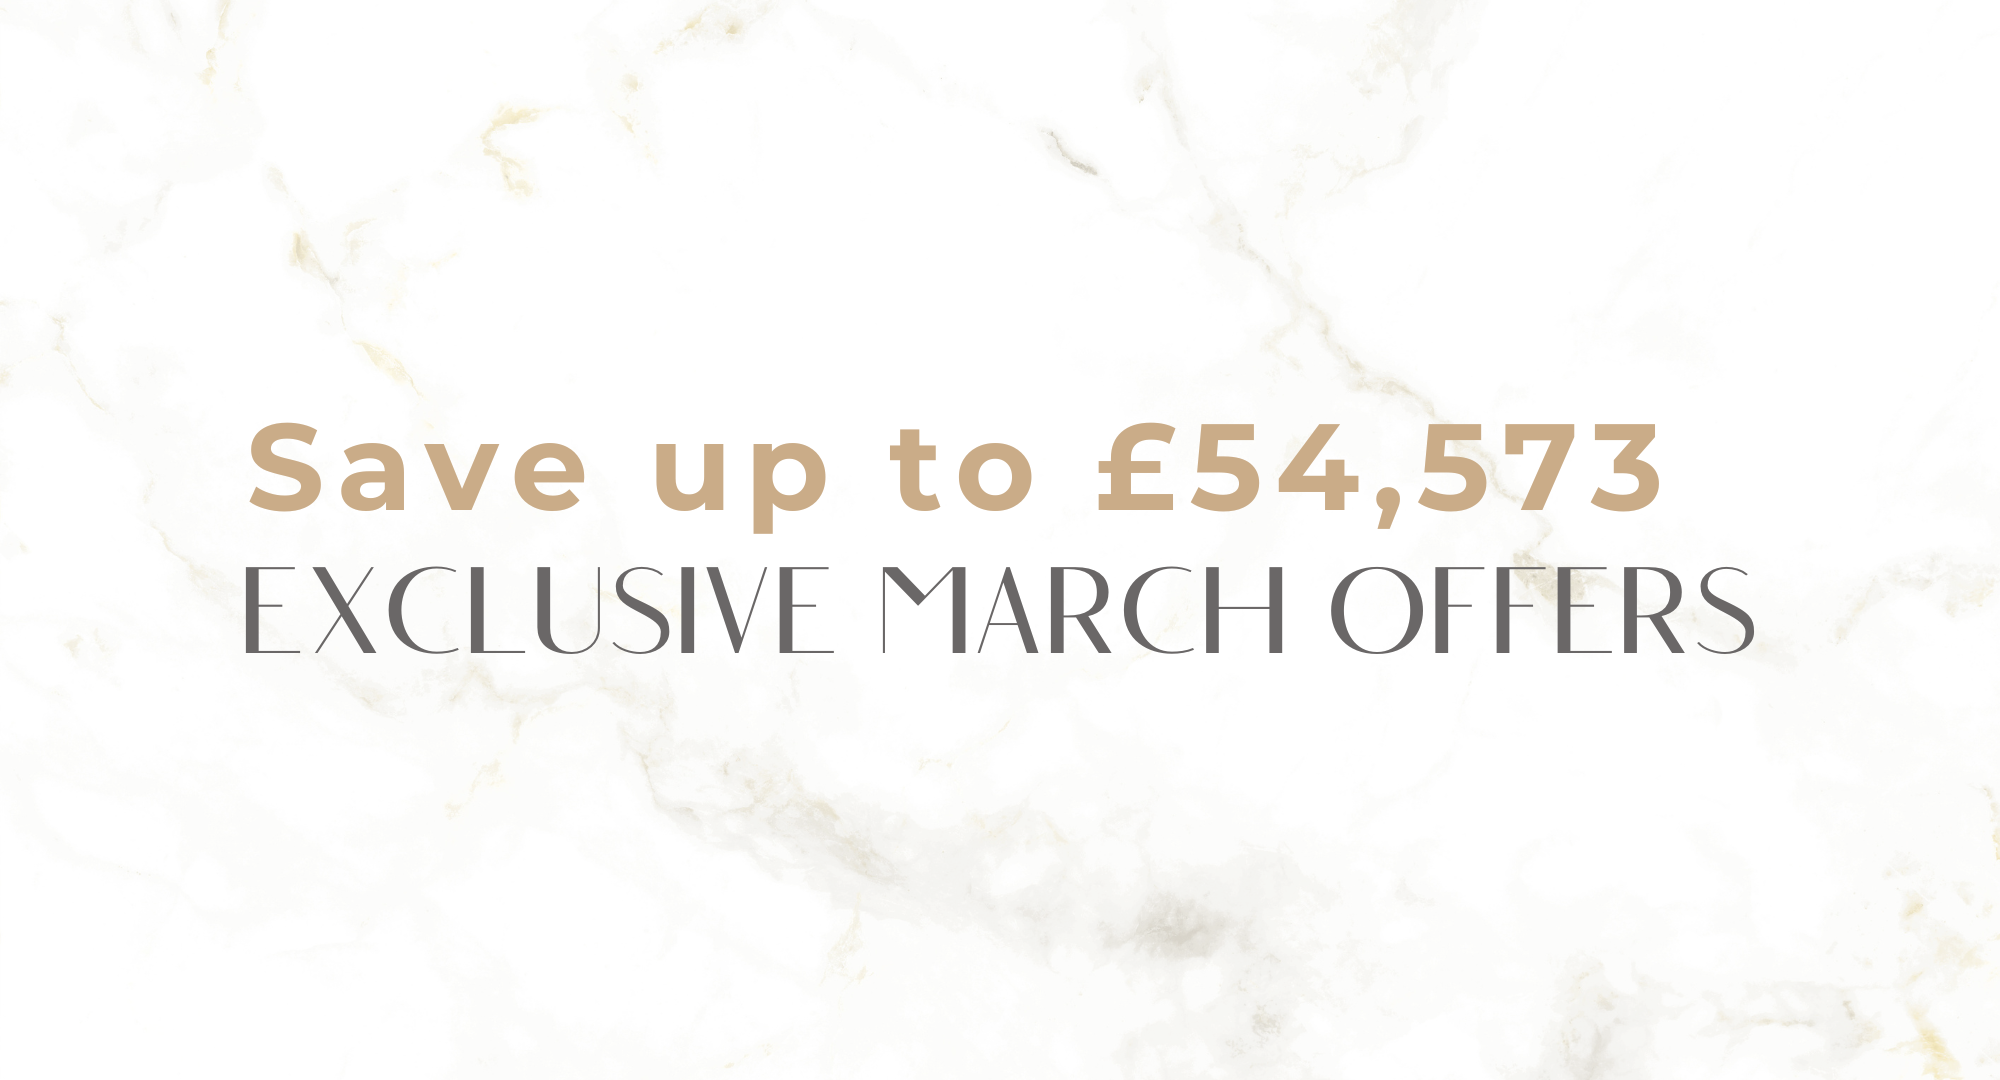 Save up to £54,573 with our latest march offers!